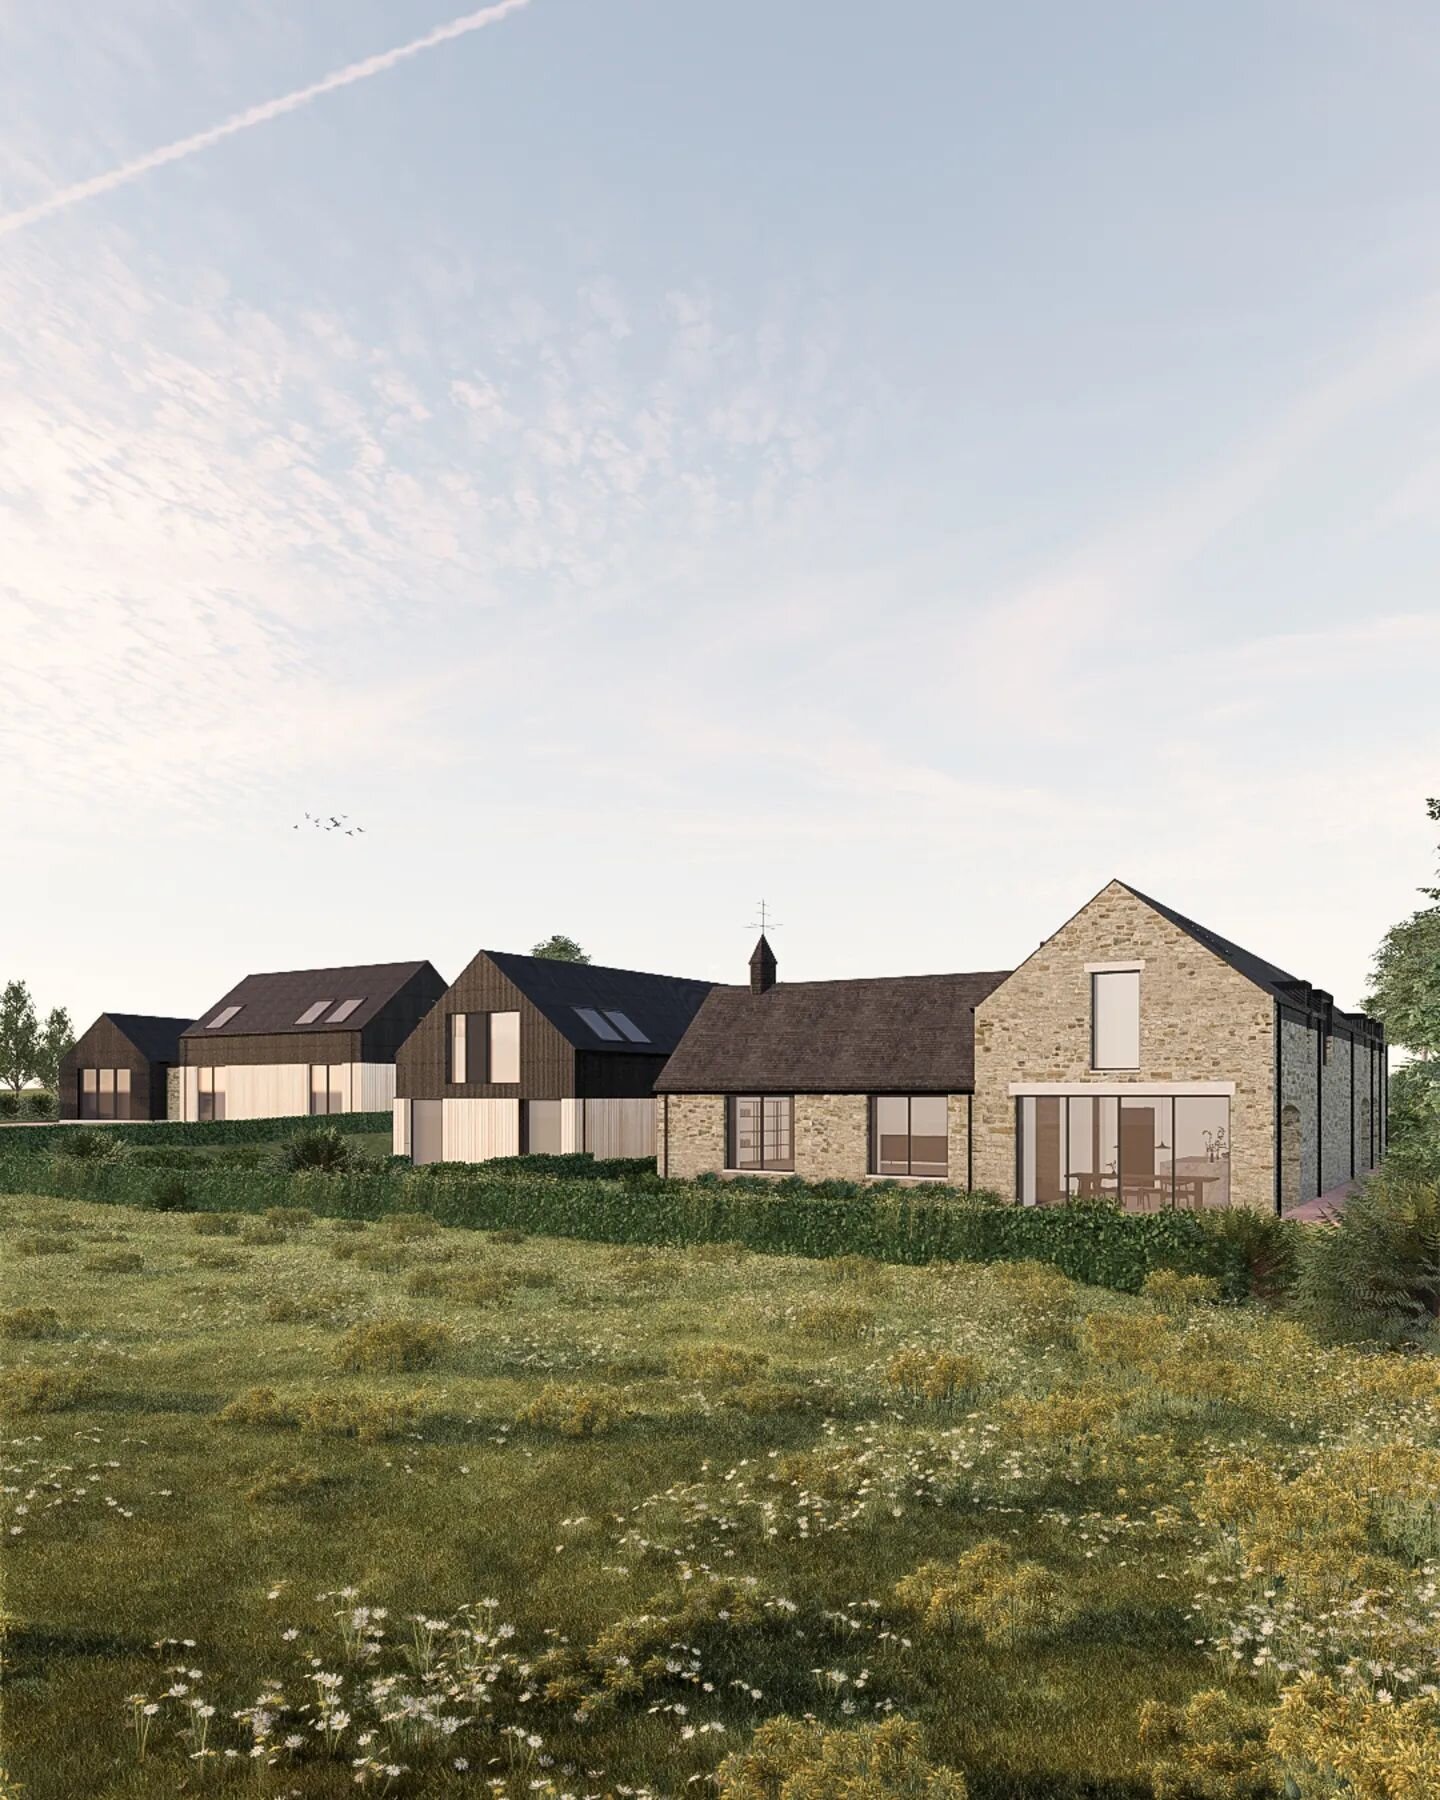 Work in progress images of this barn conversion and new residential development in Angus with @lynedochproperty . Looking forward to seeing this move forward now planning has been granted. 

#barnconversion
#residentialdevelopment
#scottisharchitectu